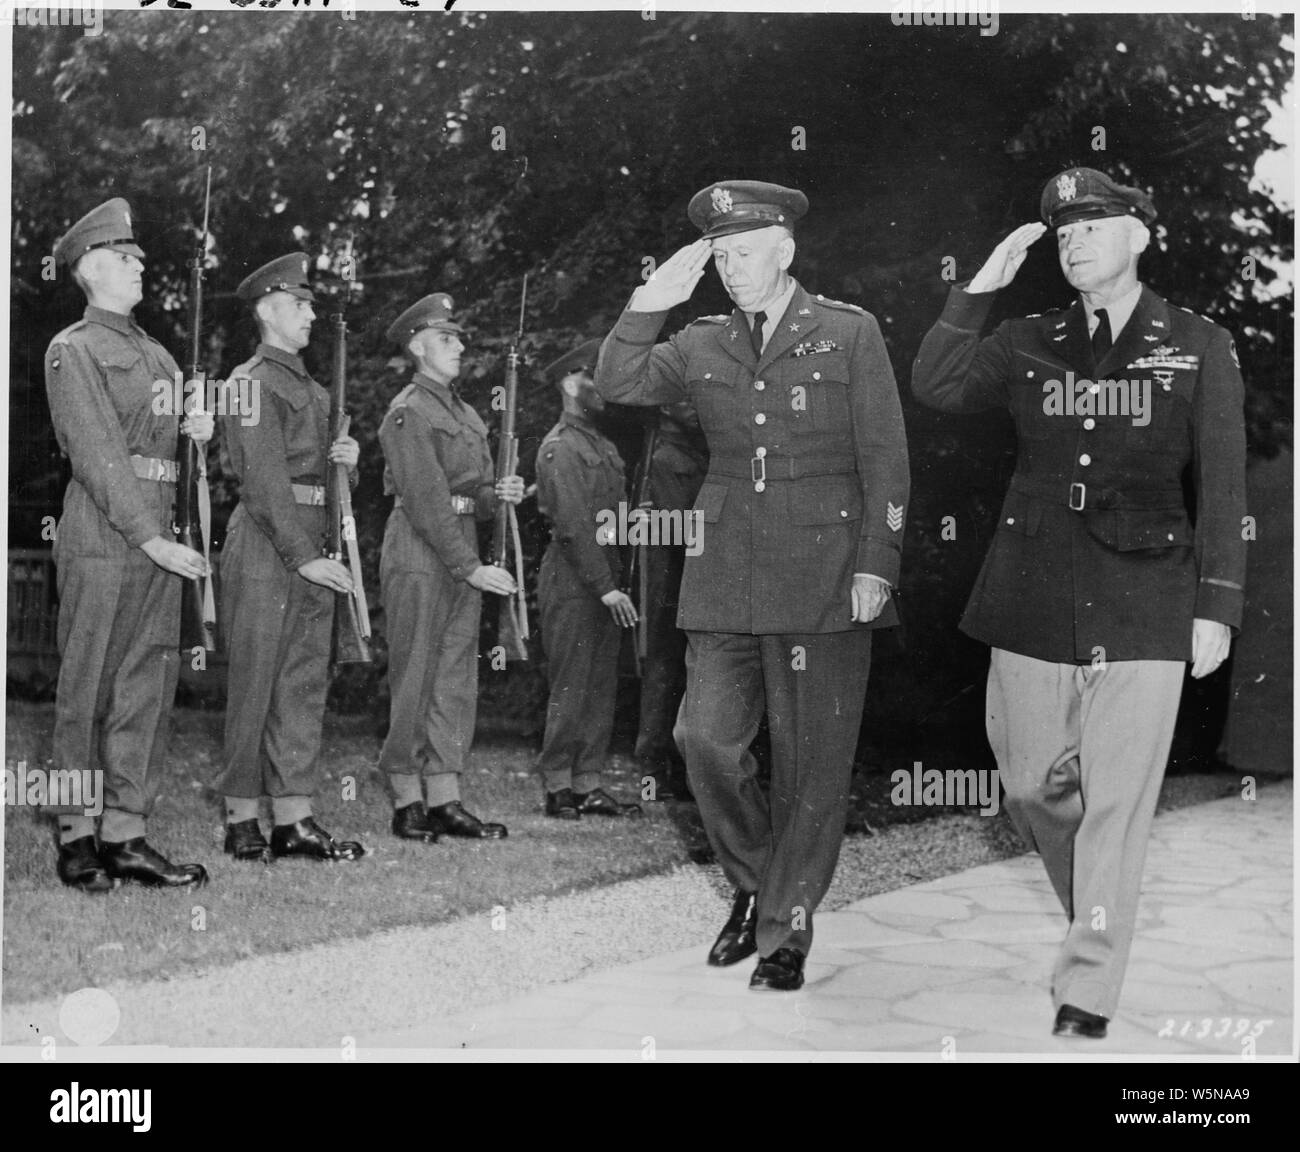 Gen. George C. Marshall, U. S. Army Chief of Staff, and Gen. Henry Hap Arnold, Commanding General, U. S. Army Air Forces, arrive at the residence of Prime Minister Winston Churchill for a dinner given by the British Prime Minister for President Truman and Soviet leader Josef Stalin during the Potsdam Conference. The two generals return the salute of the Guard of Honor formed by a detachment of Scots Guards of the British Brigade of Foot Guards Stock Photo